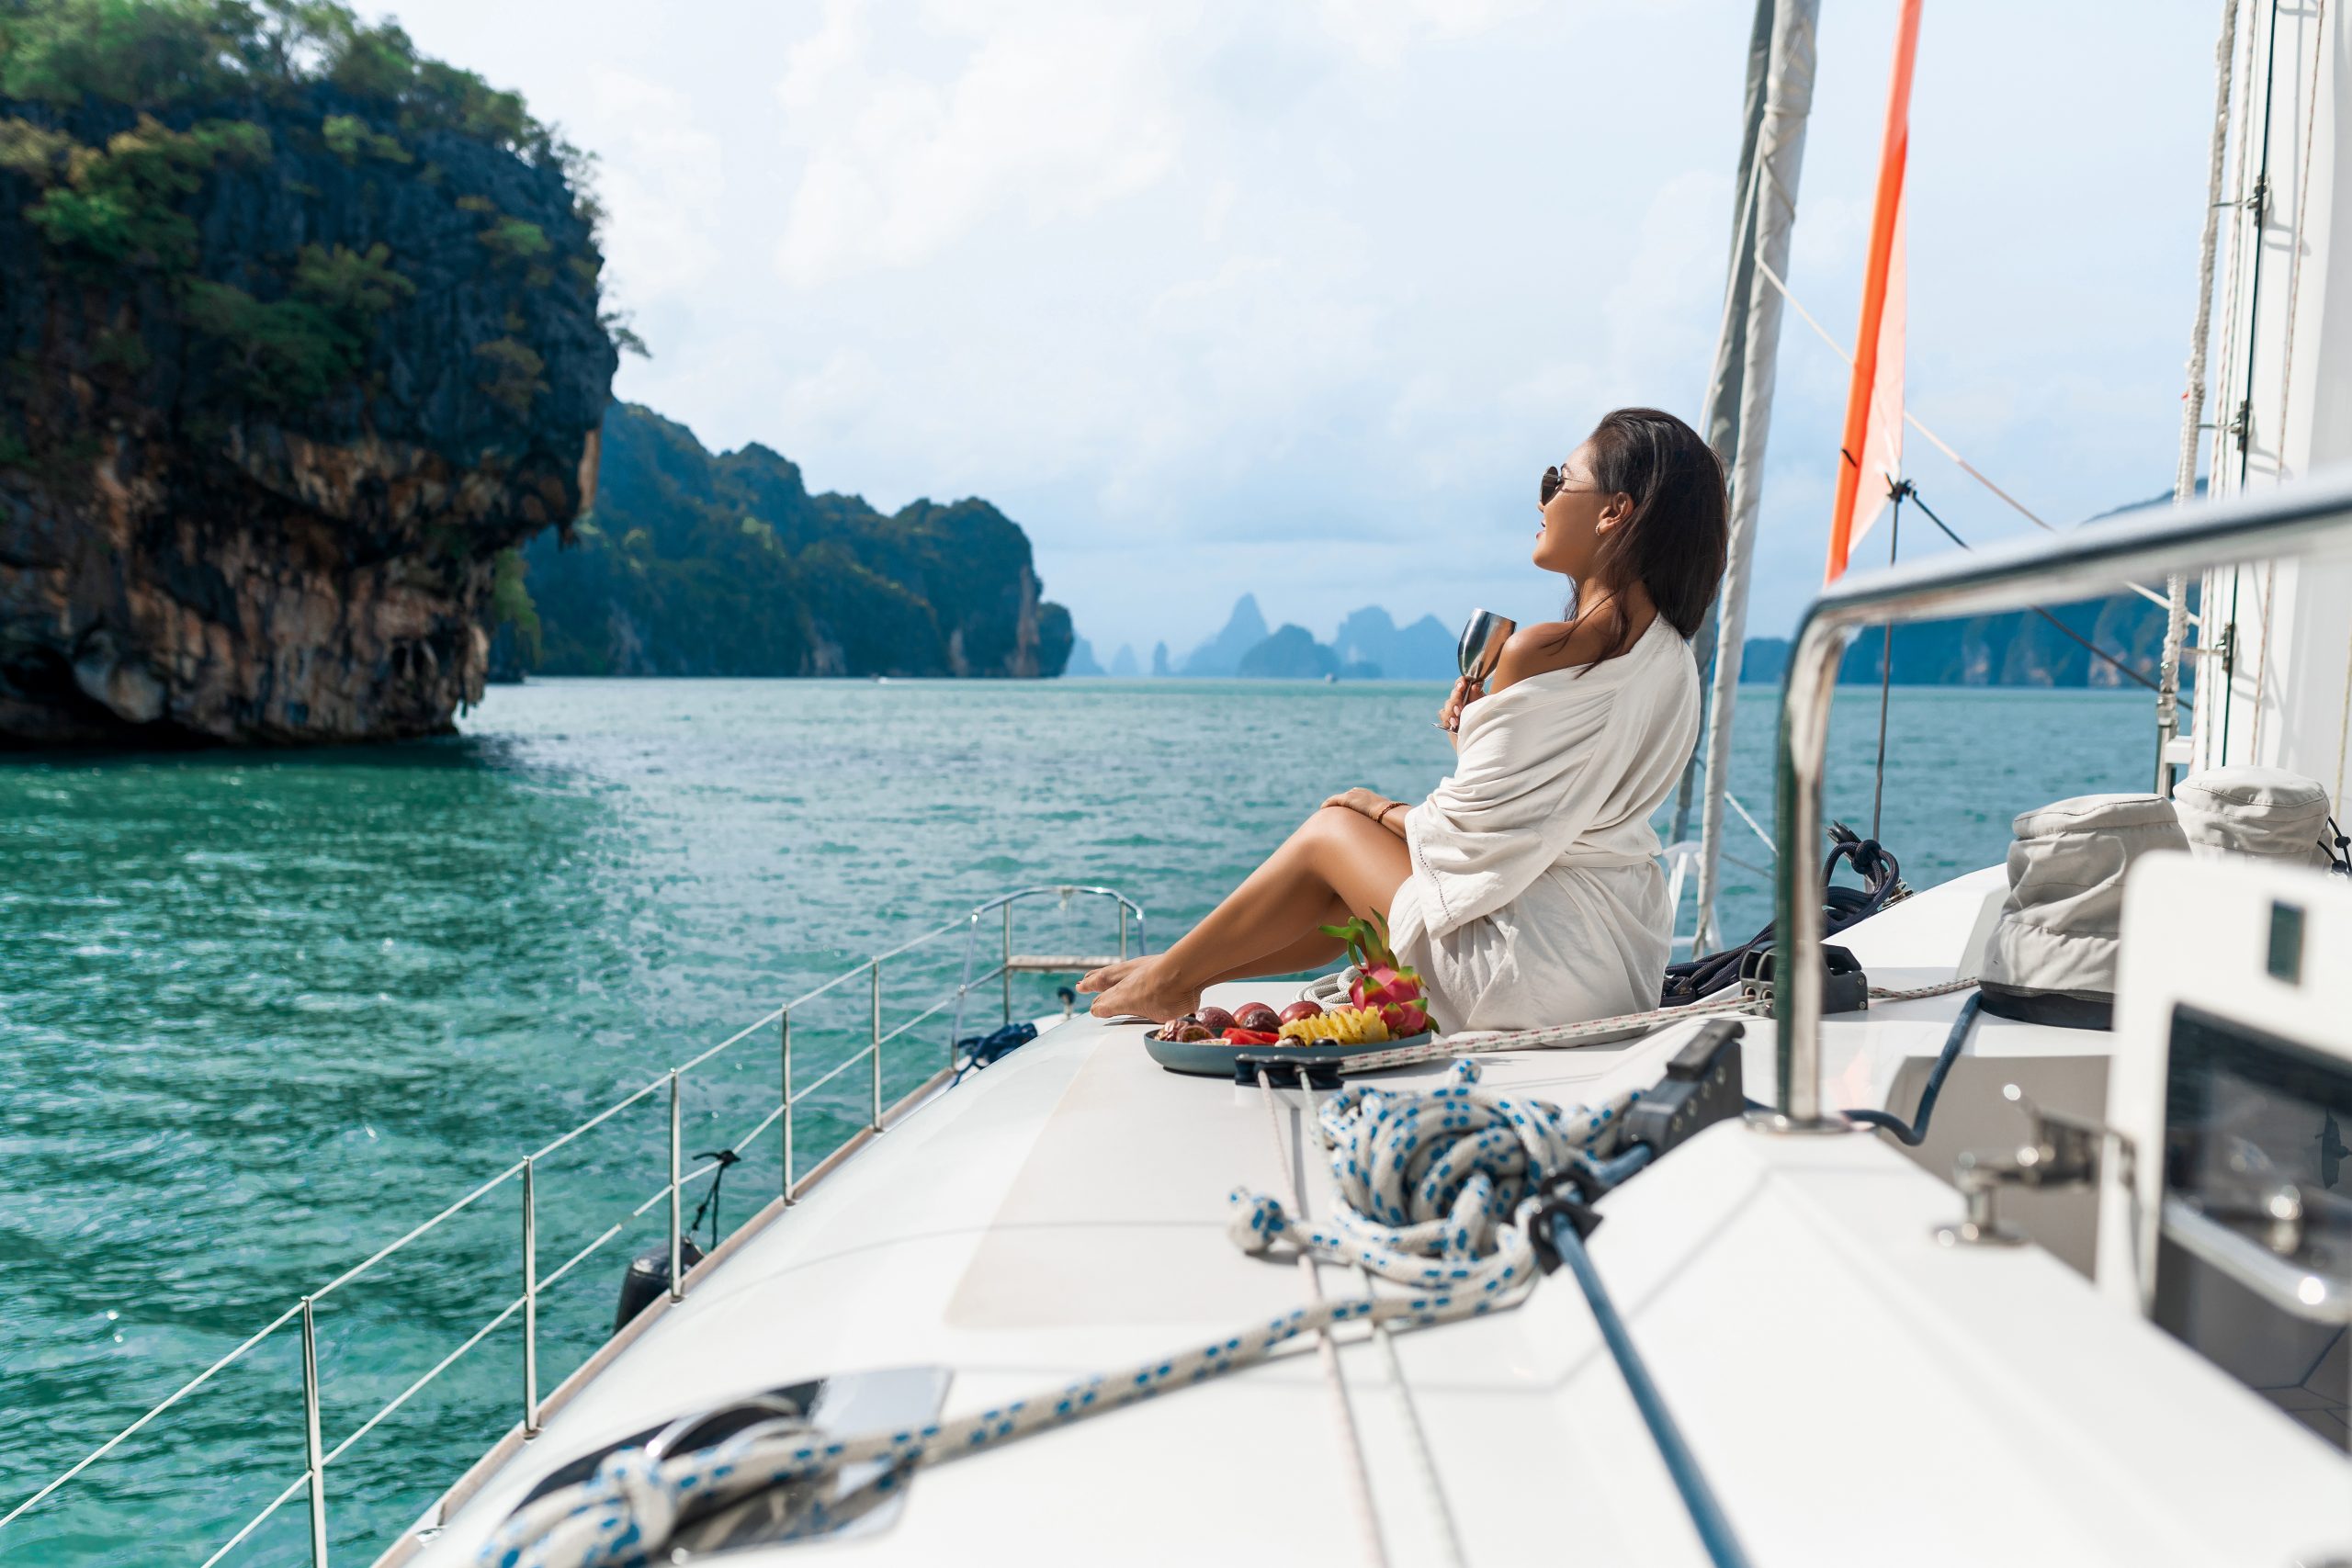 Activities To Do on Your Yacht Charter Getaway